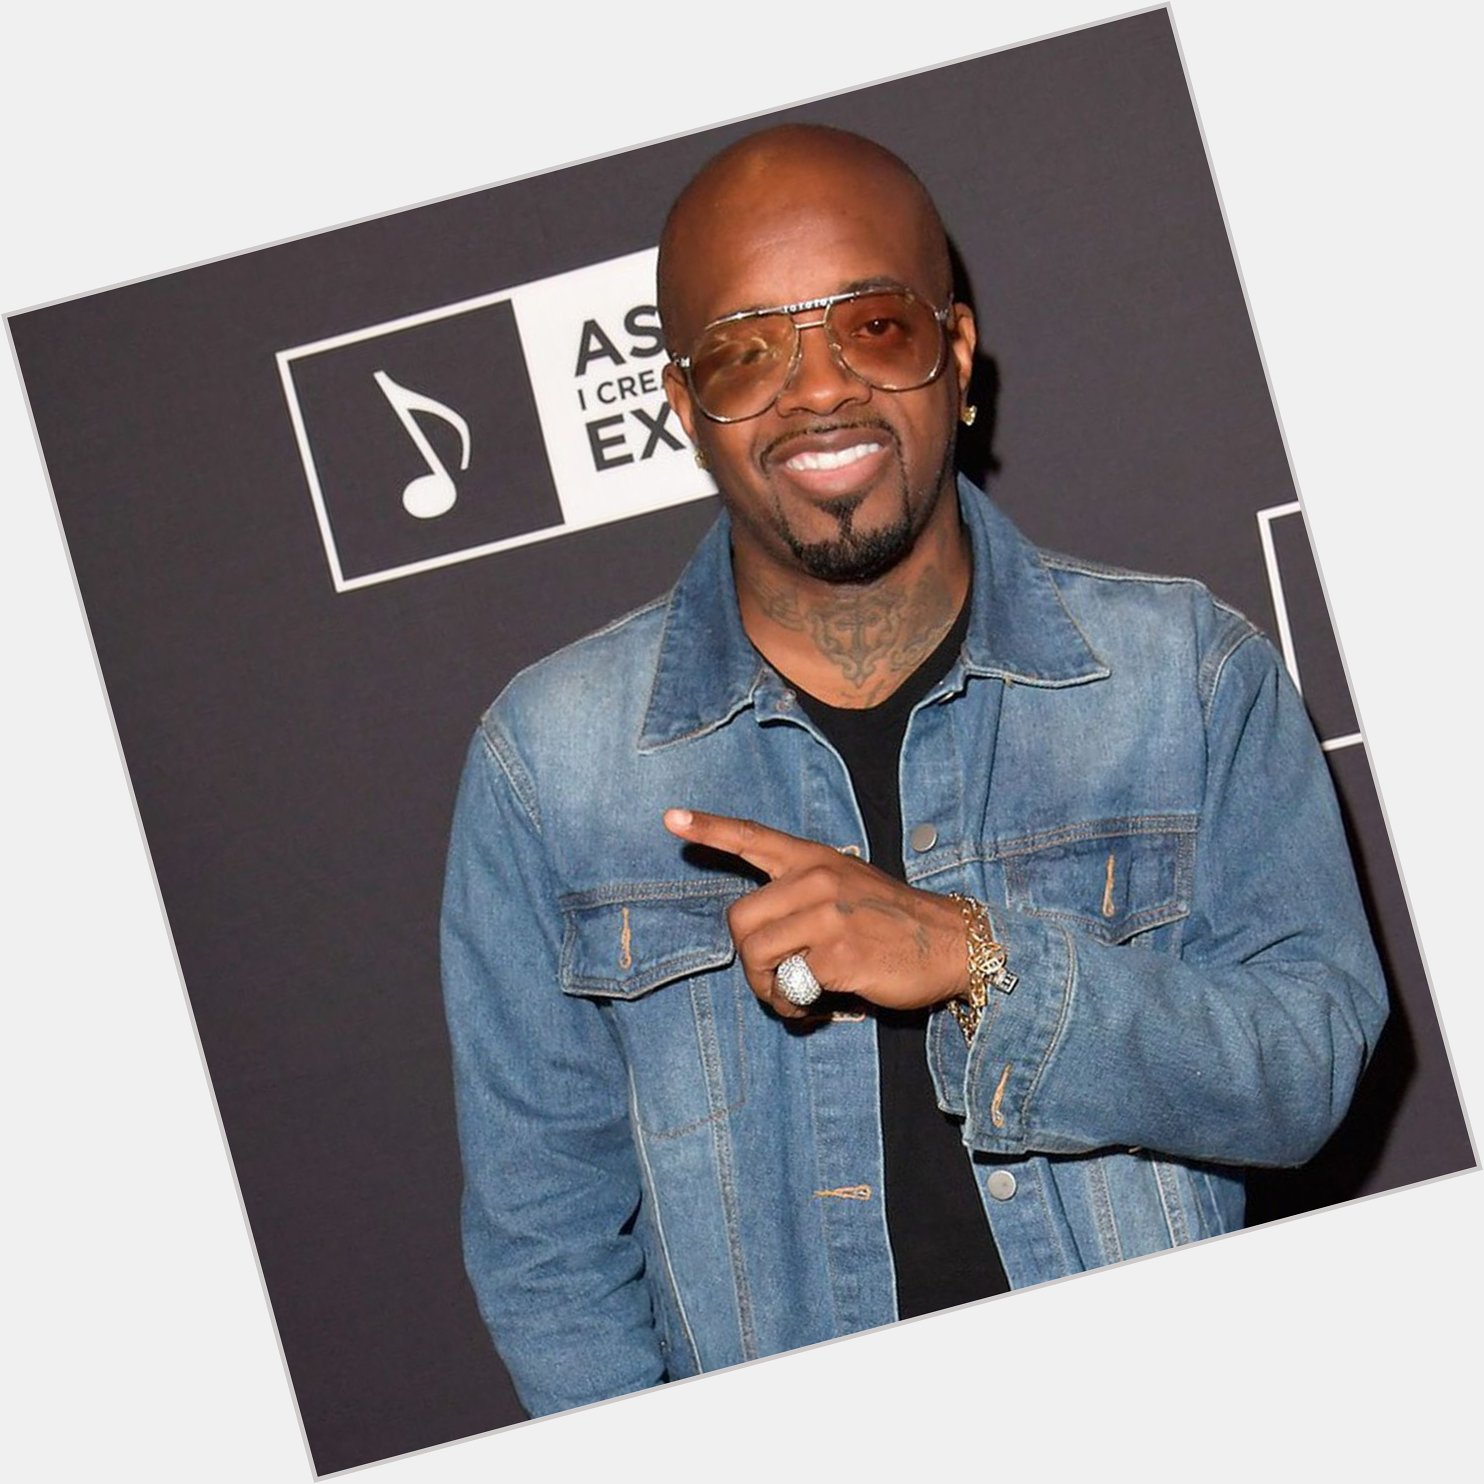 Happy Birthday to the one and only Jermaine Dupri! 